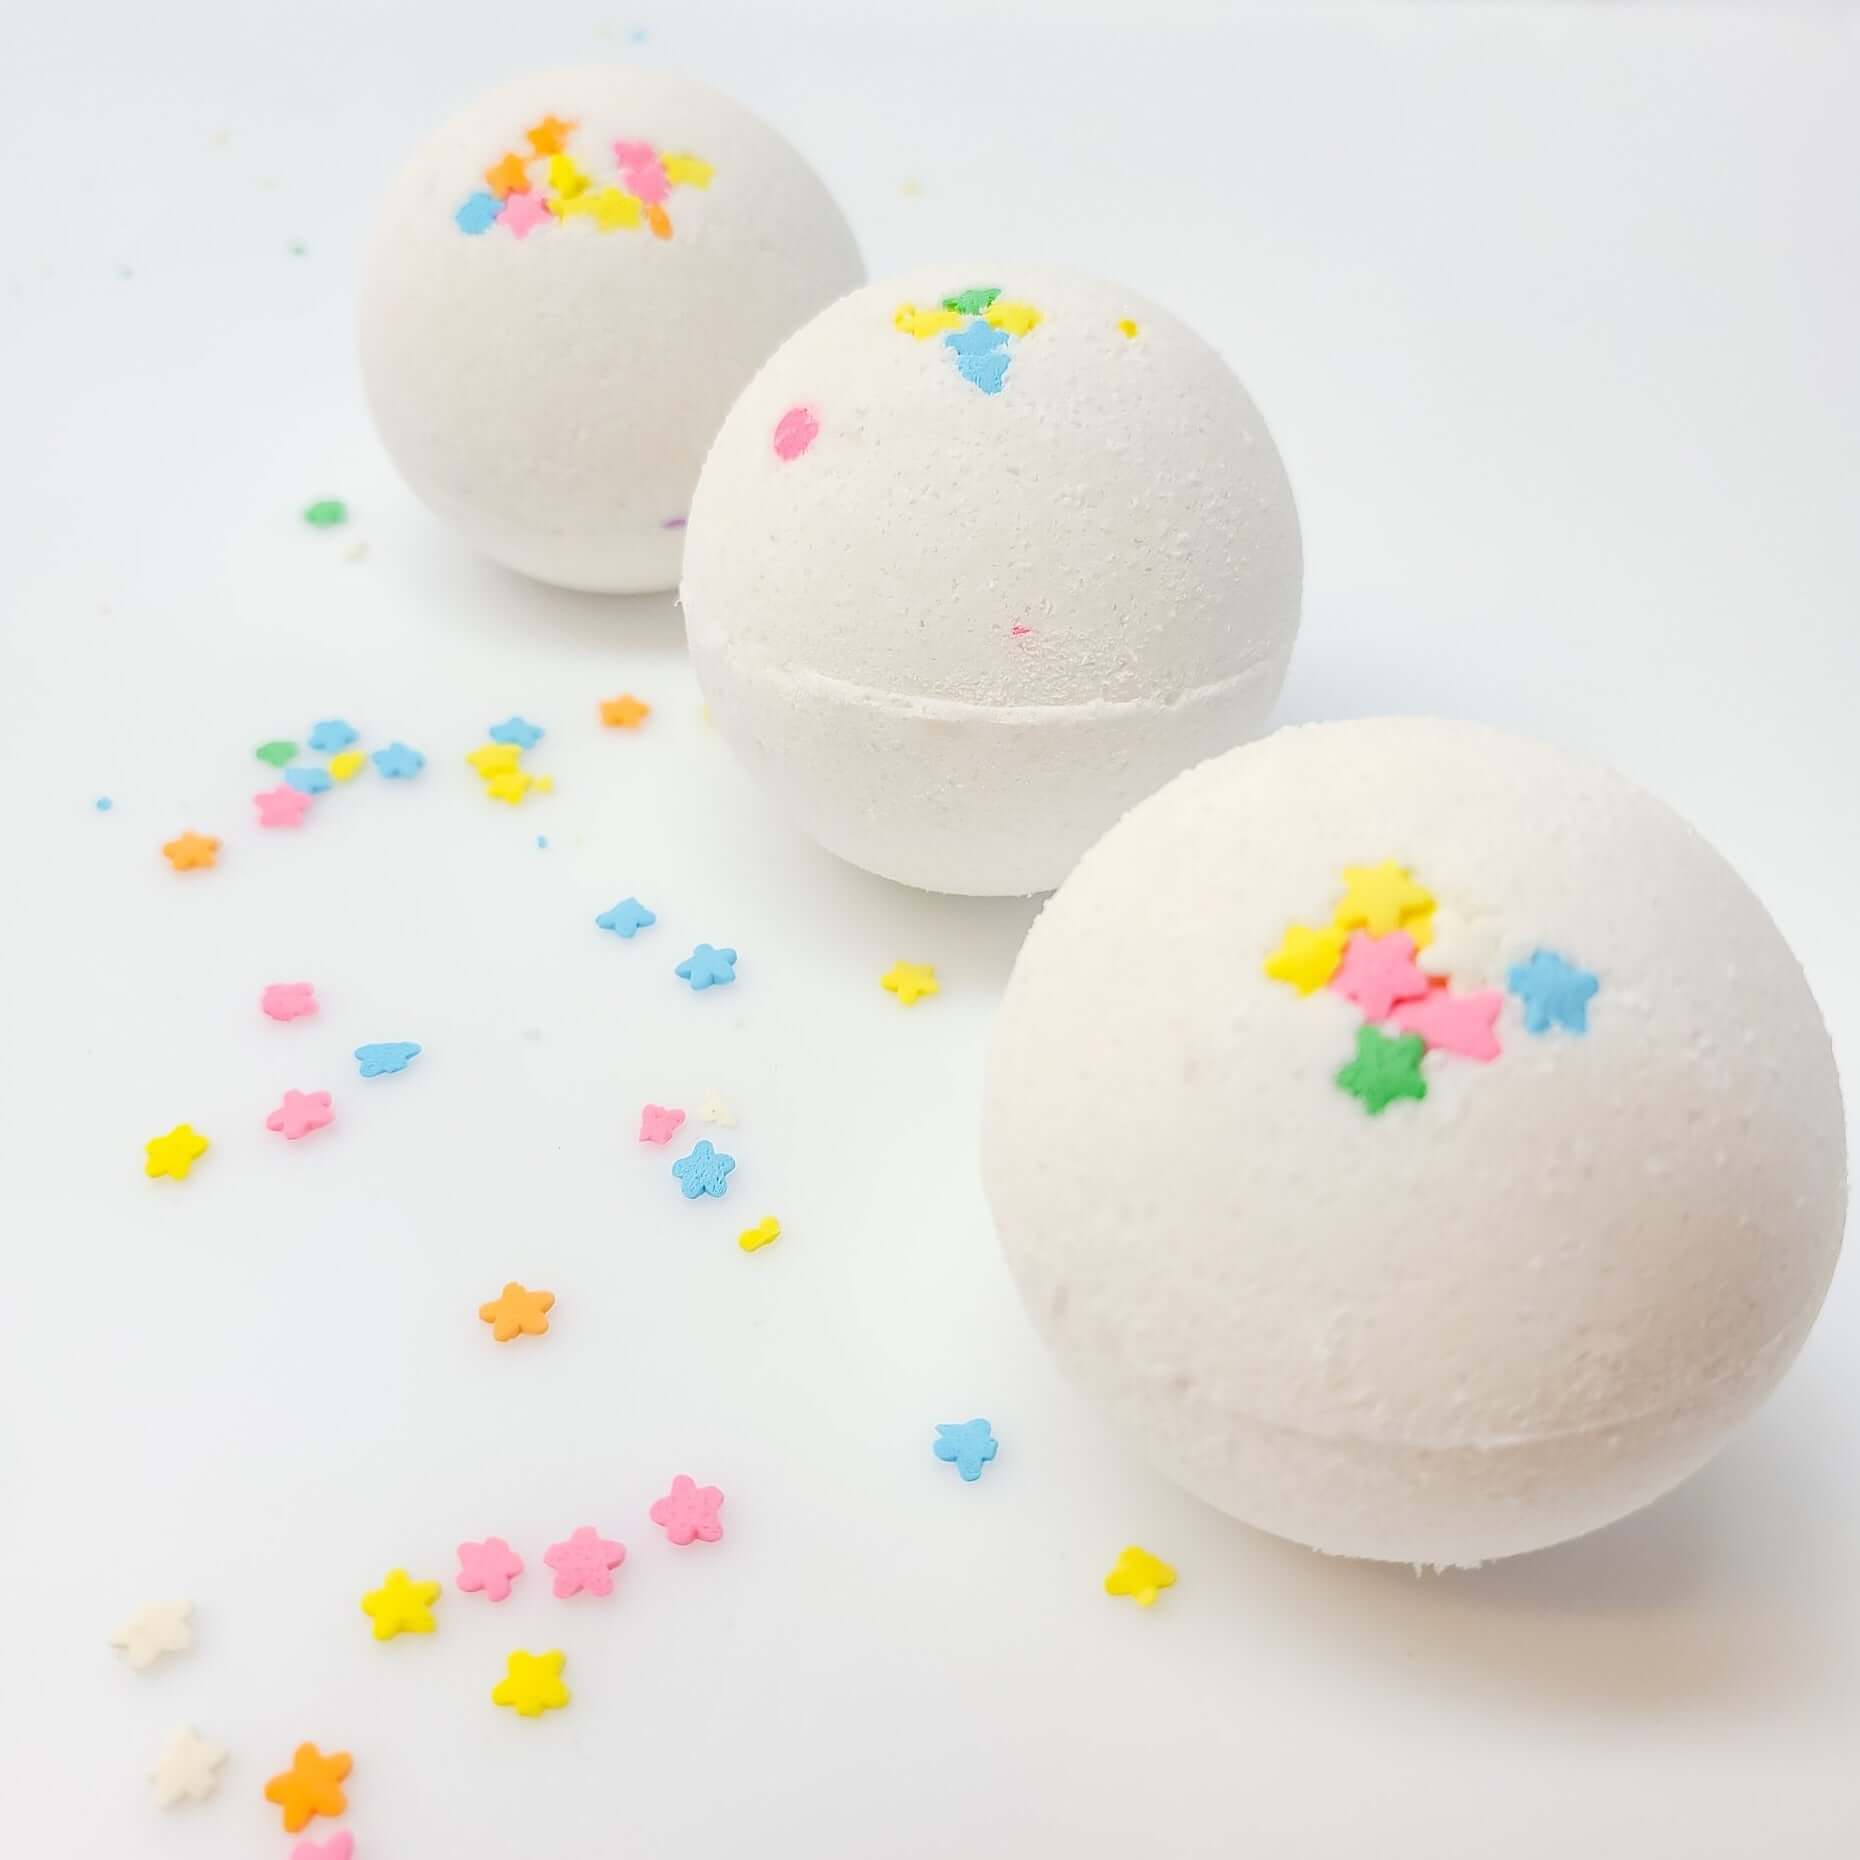 Birthday Cake Bath Bomb, perfect for an at-home spa day with soothing cocoa butter and avocado oil | CG Pure Wash